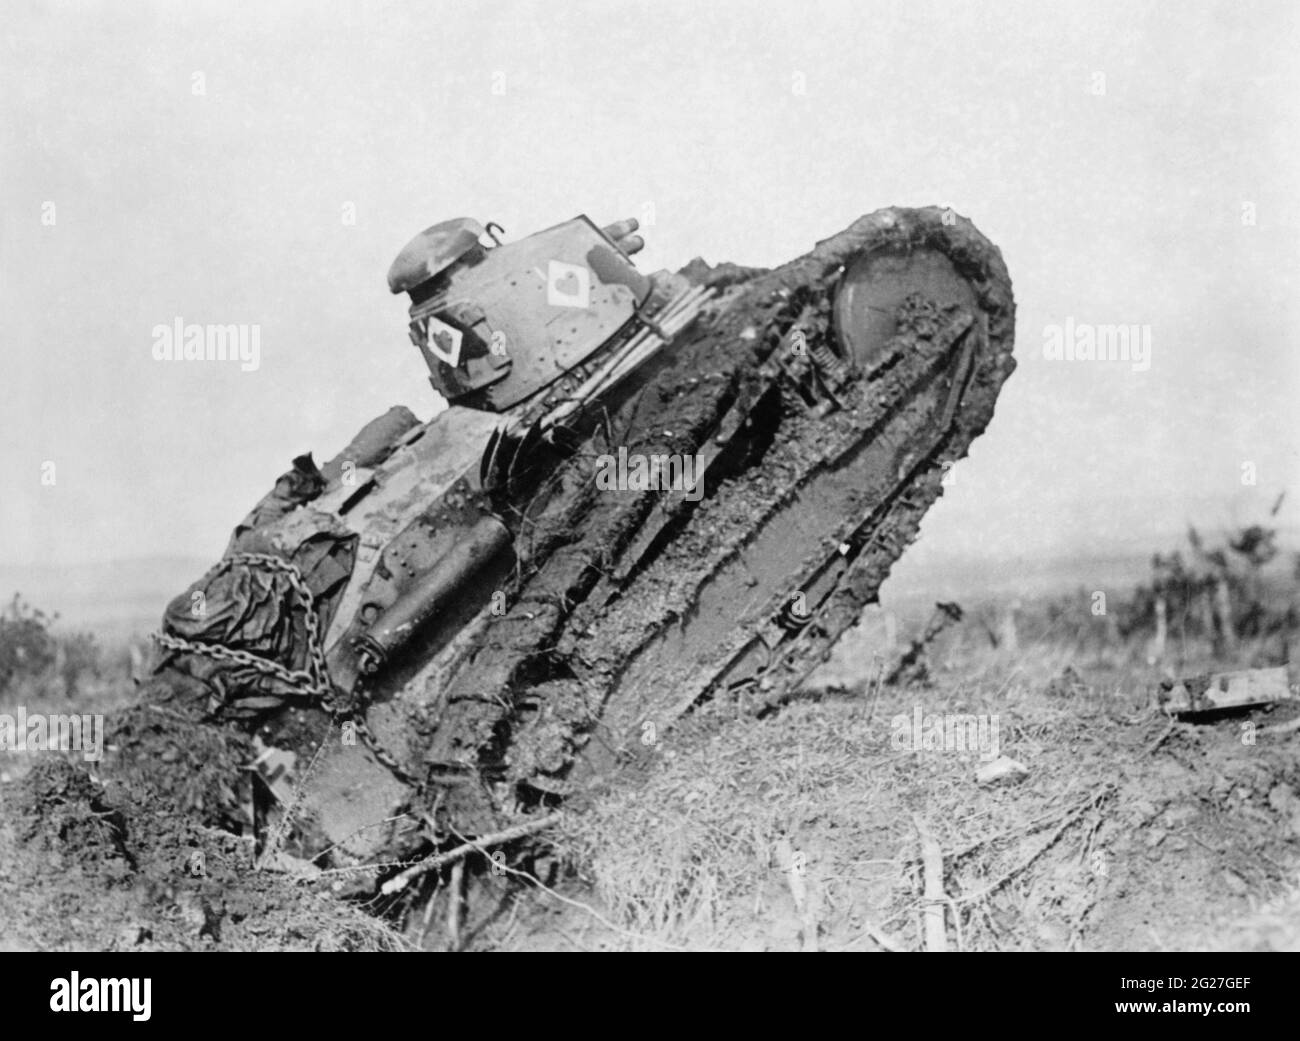 A French Renault FT 17 tank blasting through a trench during World War I. Stock Photo